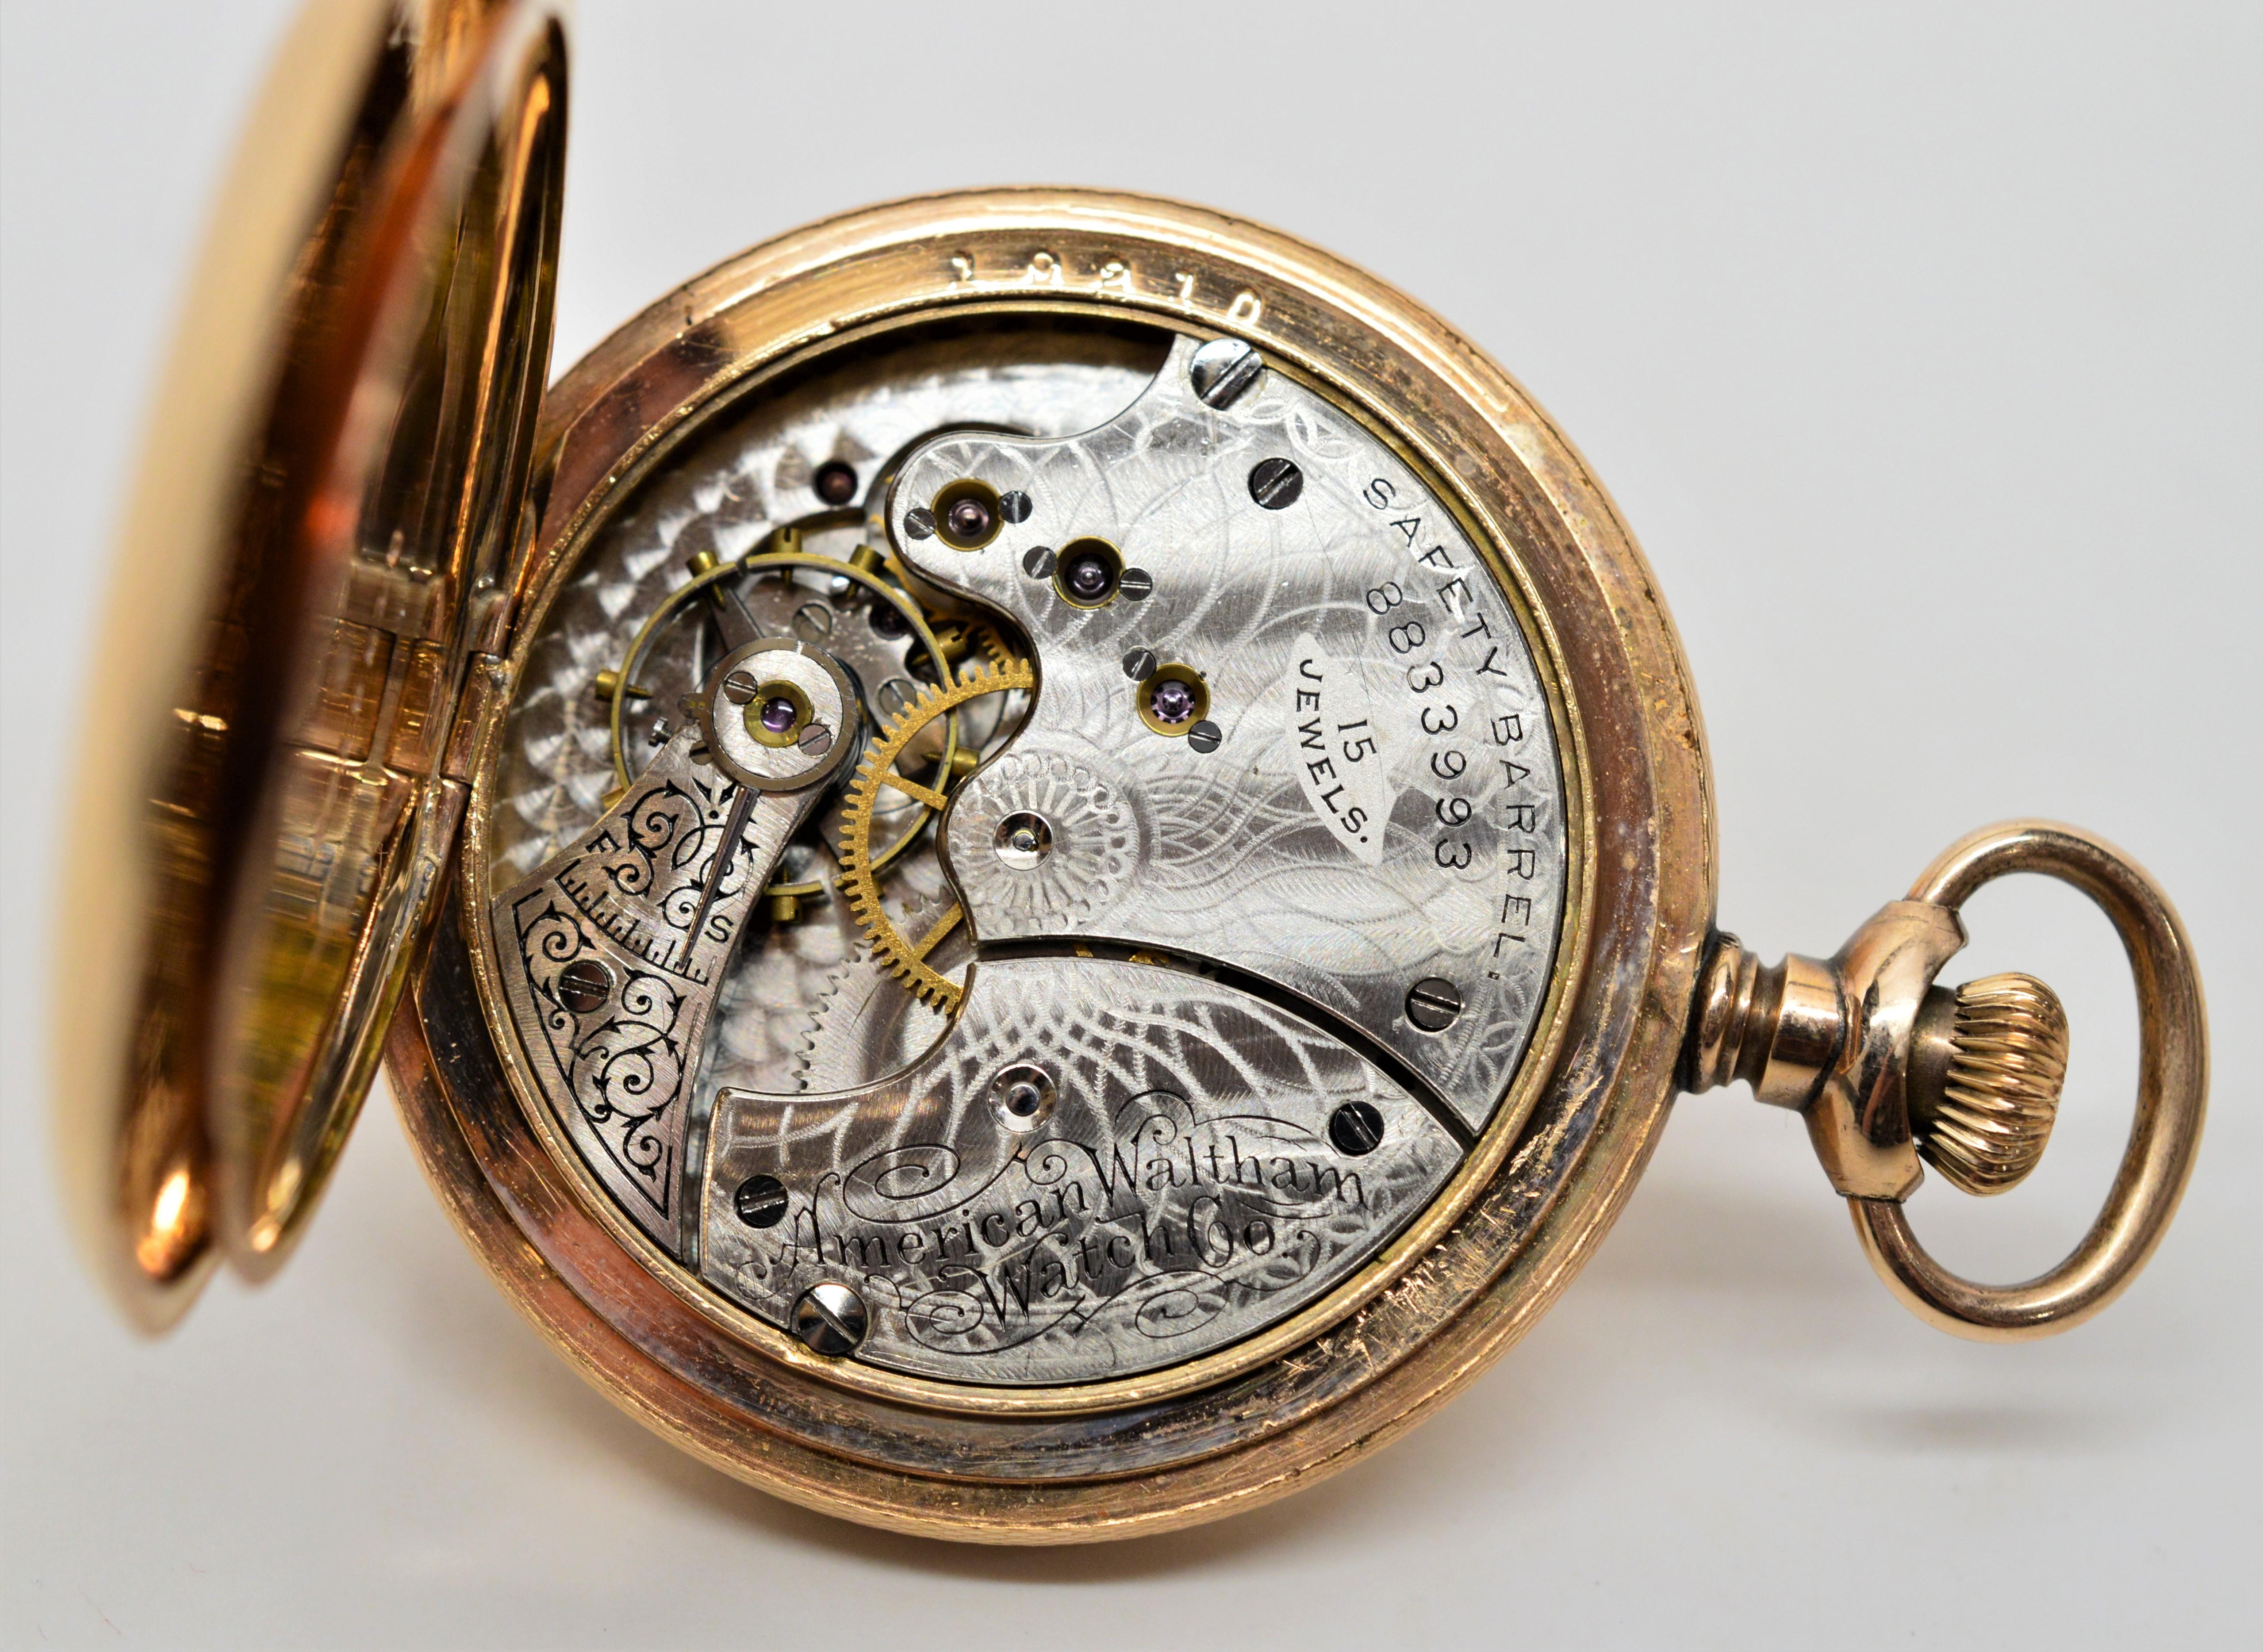 Circa 1898, fourteen carat yellow gold Waltham Watch Co. Seaside Pocket Watch model 1890, in size 6S with acid etched fancy 15 jeweled movement. 
Hunting case by J. Bossi #2619218. Measures 41.6 mm. Serial #8833993. Working and in mint condition.